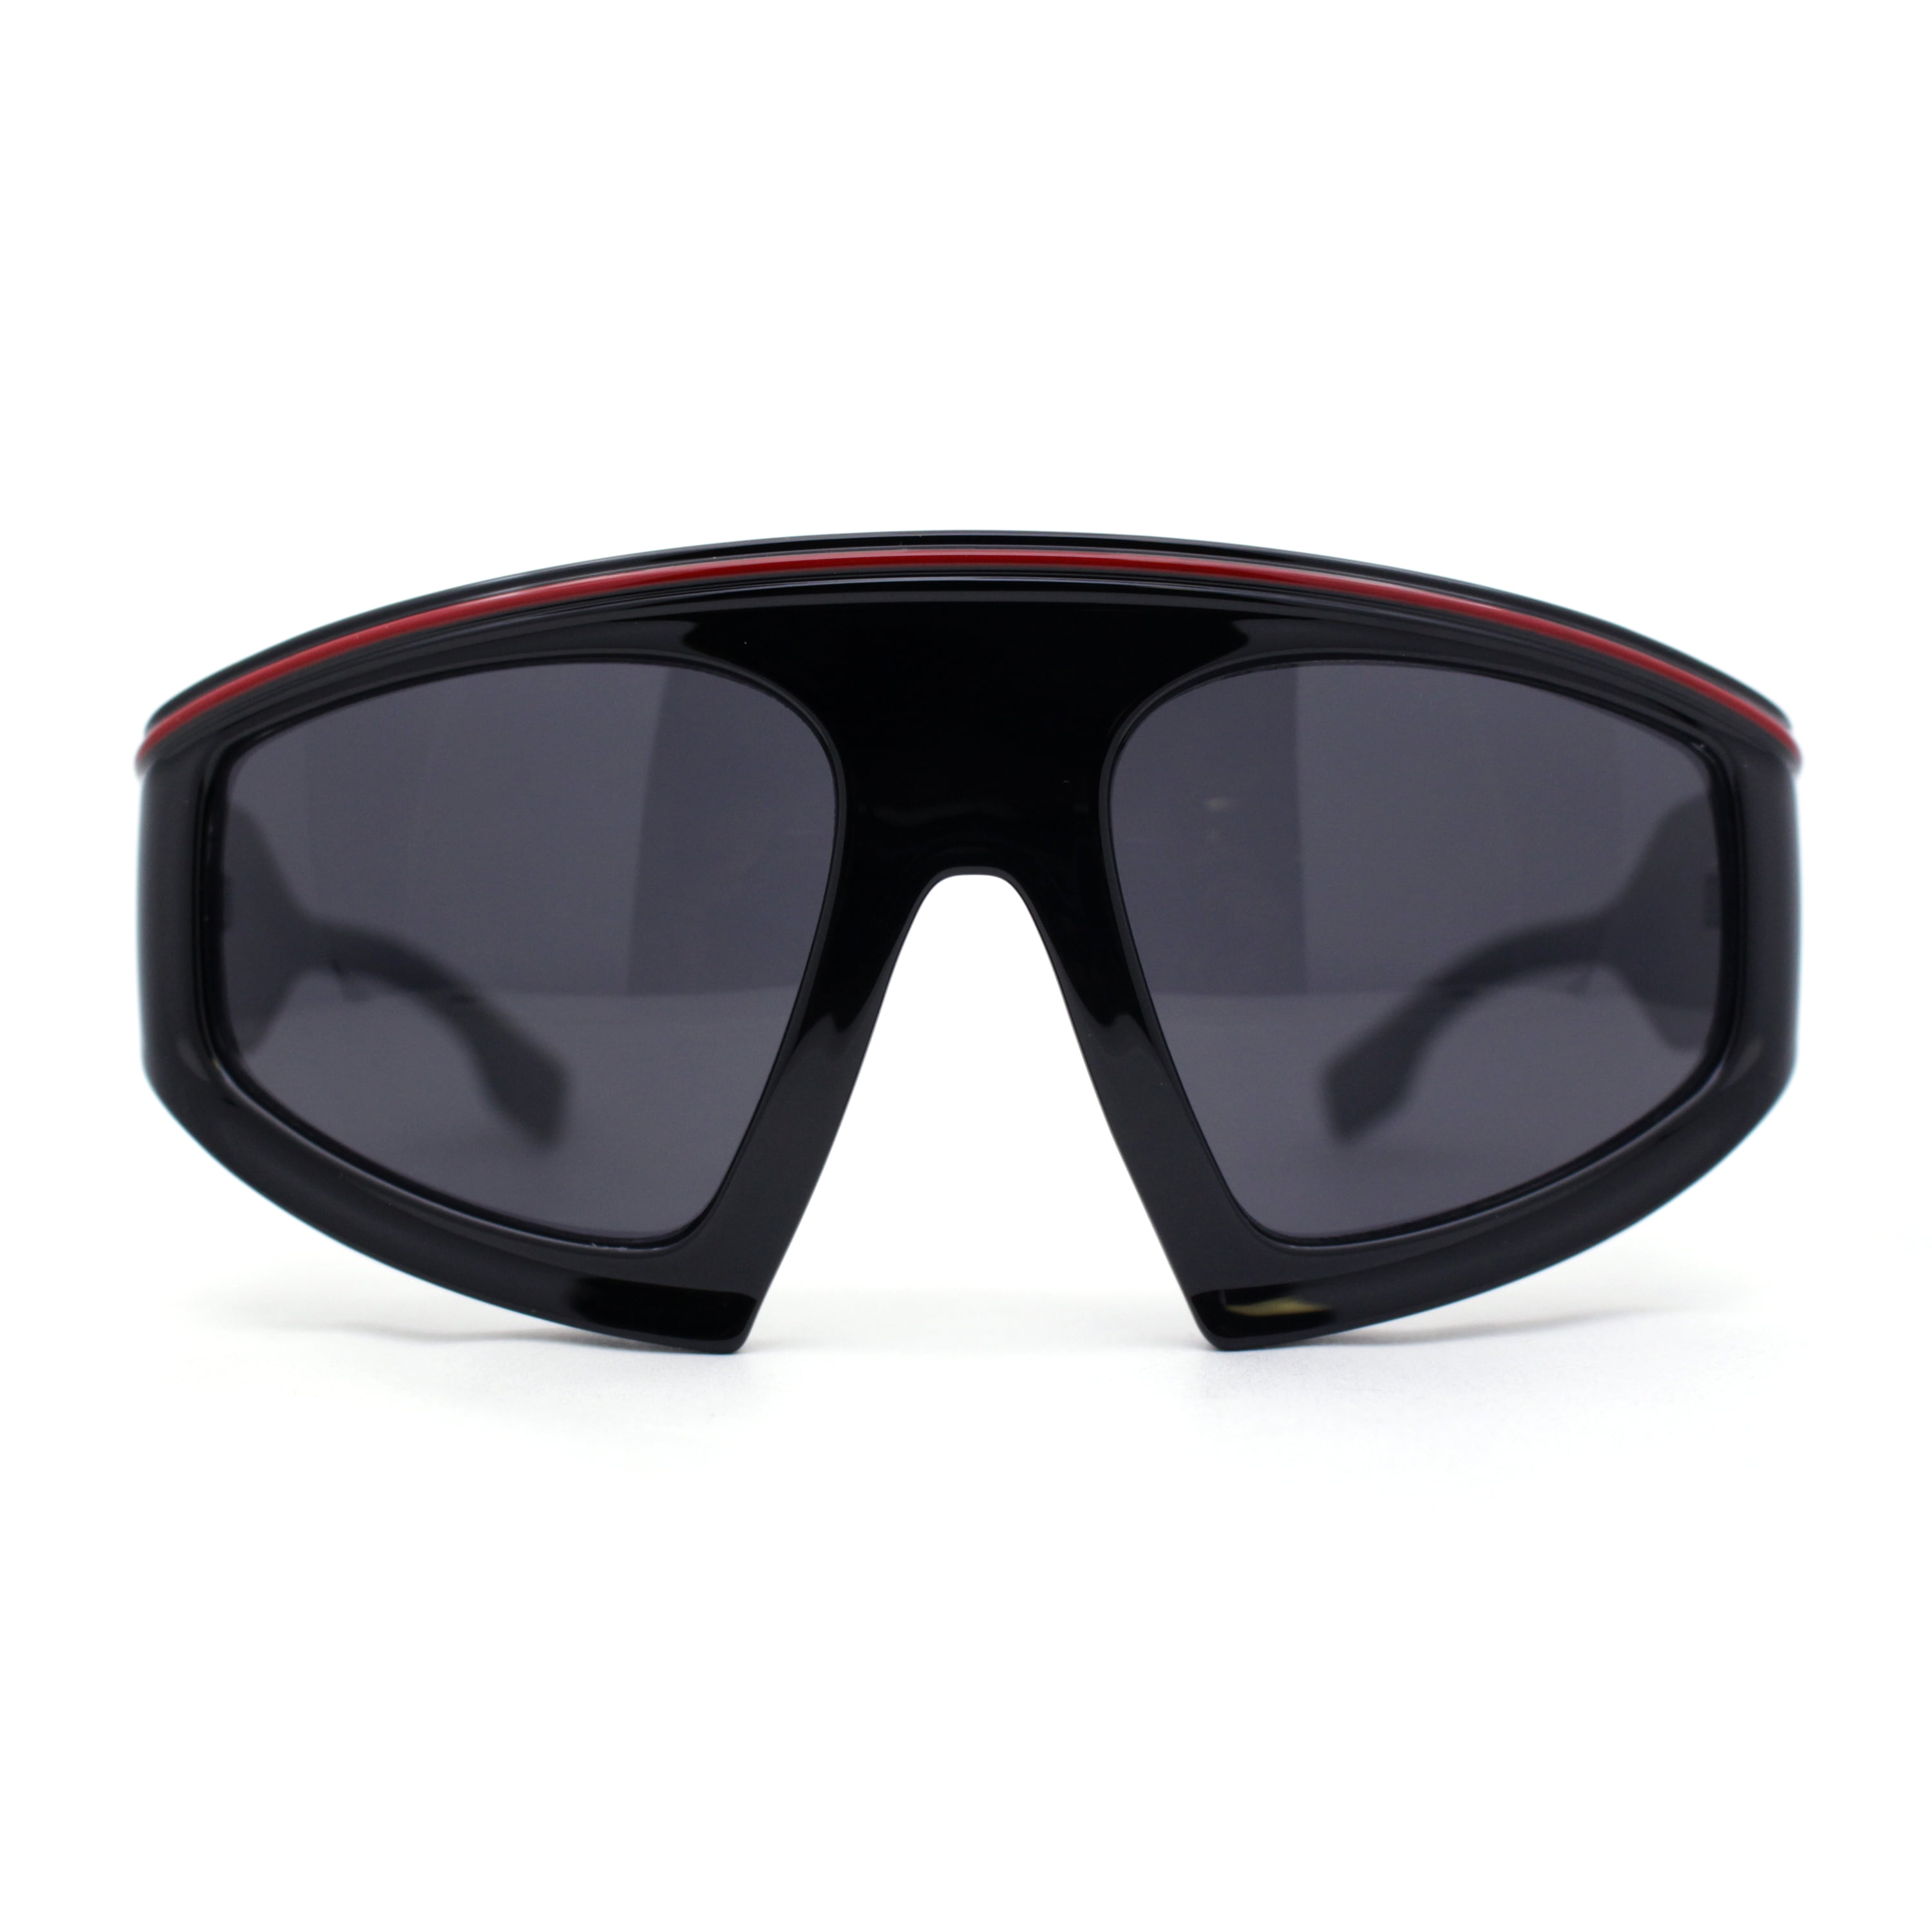 Oversized Curved Top Racer Thick Plastic Sunglasses All Black